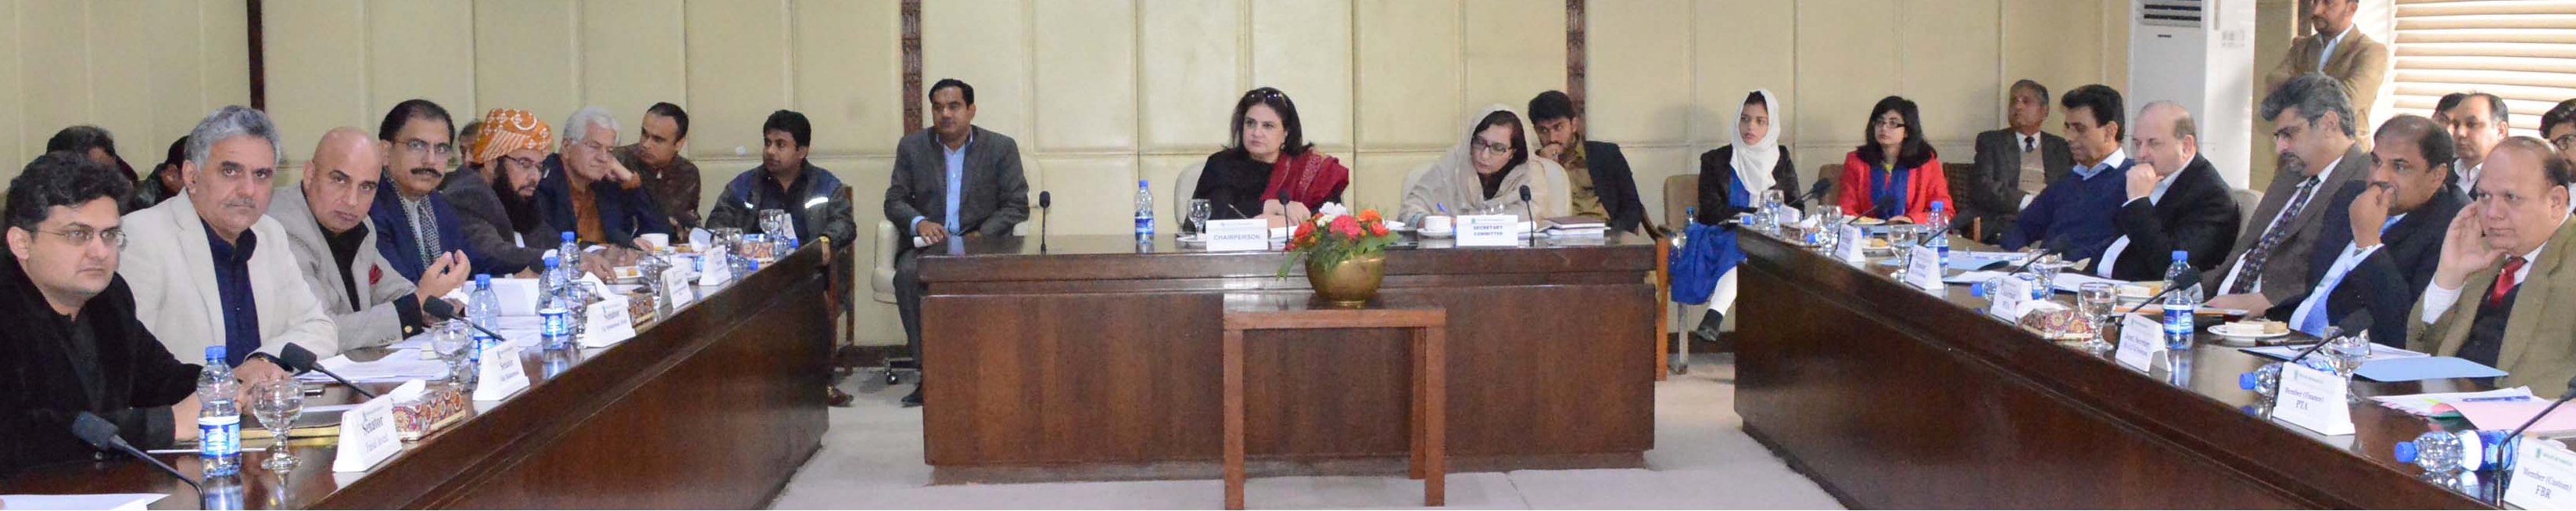 SENATOR RUBINA KHALID, CHAIRPERSON SENATE STANDING COMMITTEE ON INFORMATION TECHNOLOGY AND TELECOMMUNICATION PRESIDING OVER A MEETING OF THE COMMITTEE AT PARLIAMENT HOUSE, ISLAMABAD ON JANUARY 15, 2019.